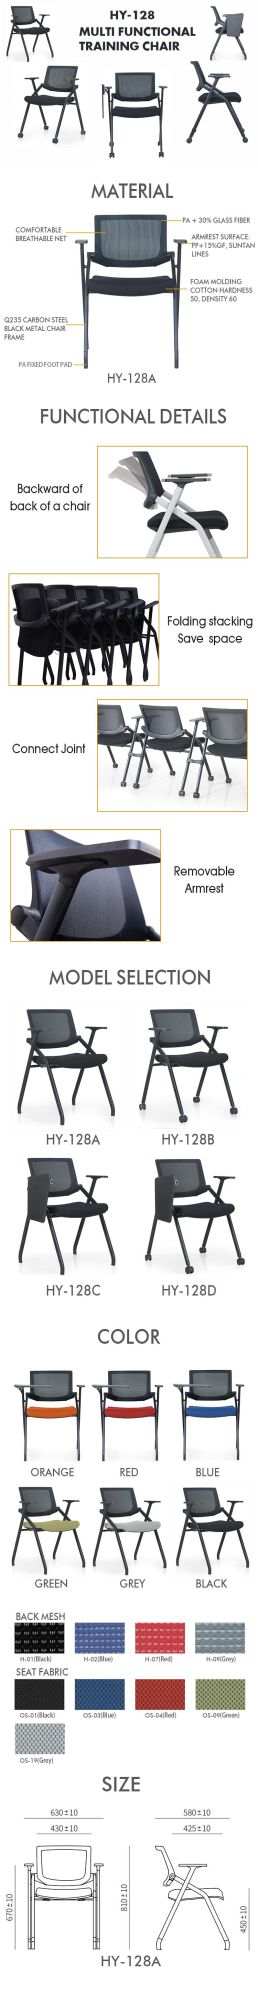 Training Dining Coffee Chair with Stainless Steel Legs